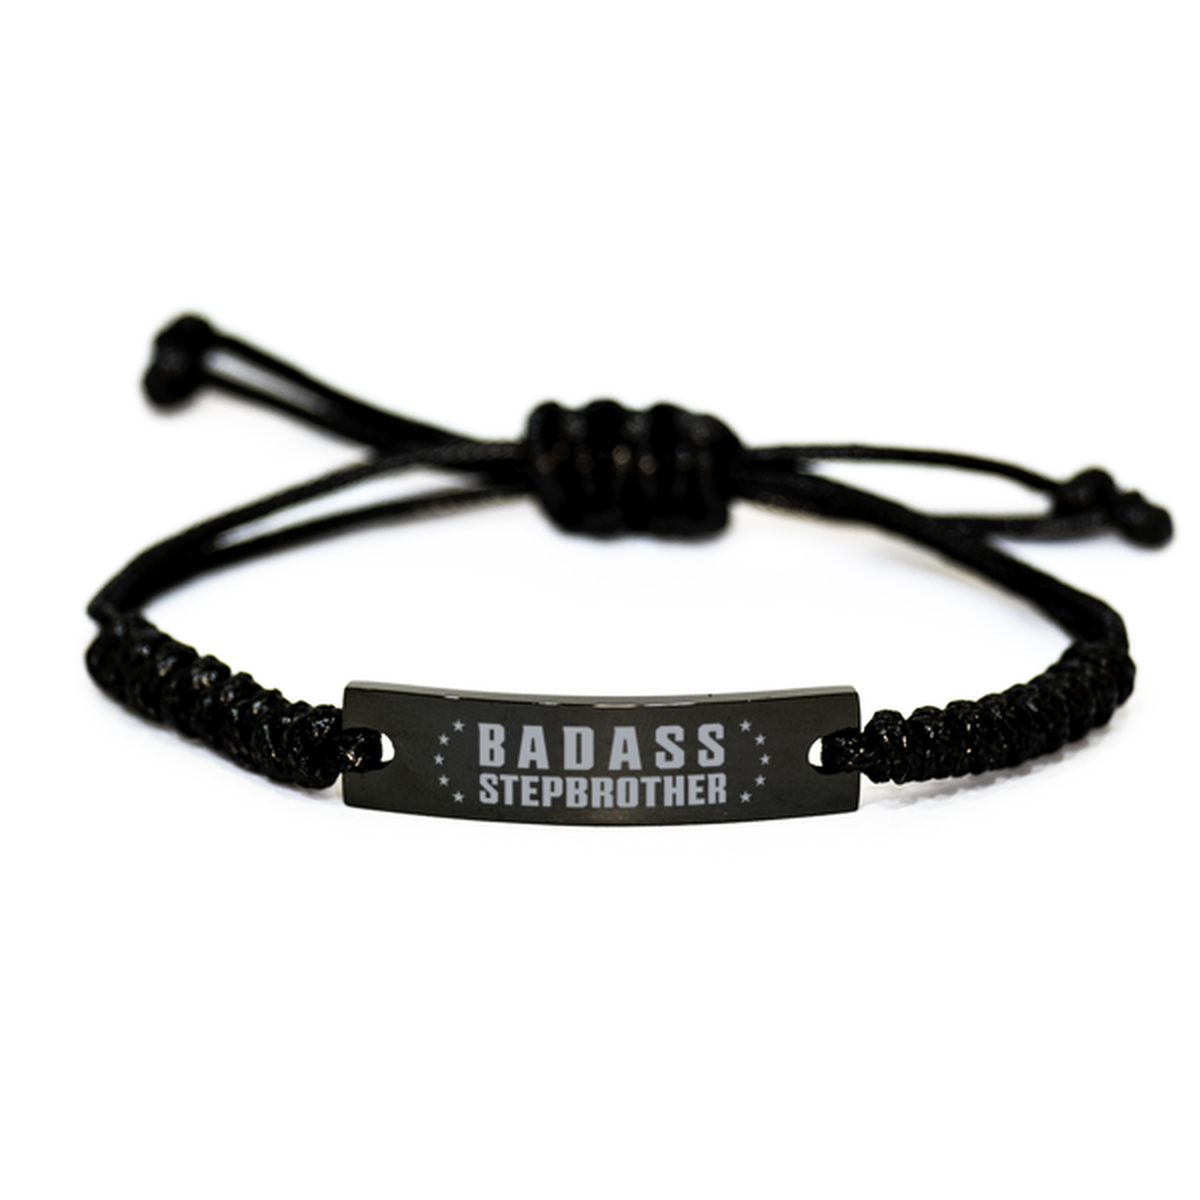 Stepbrother Rope Bracelet, Badass Stepbrother, Funny Family Gifts For Stepbrother From Brother Sister